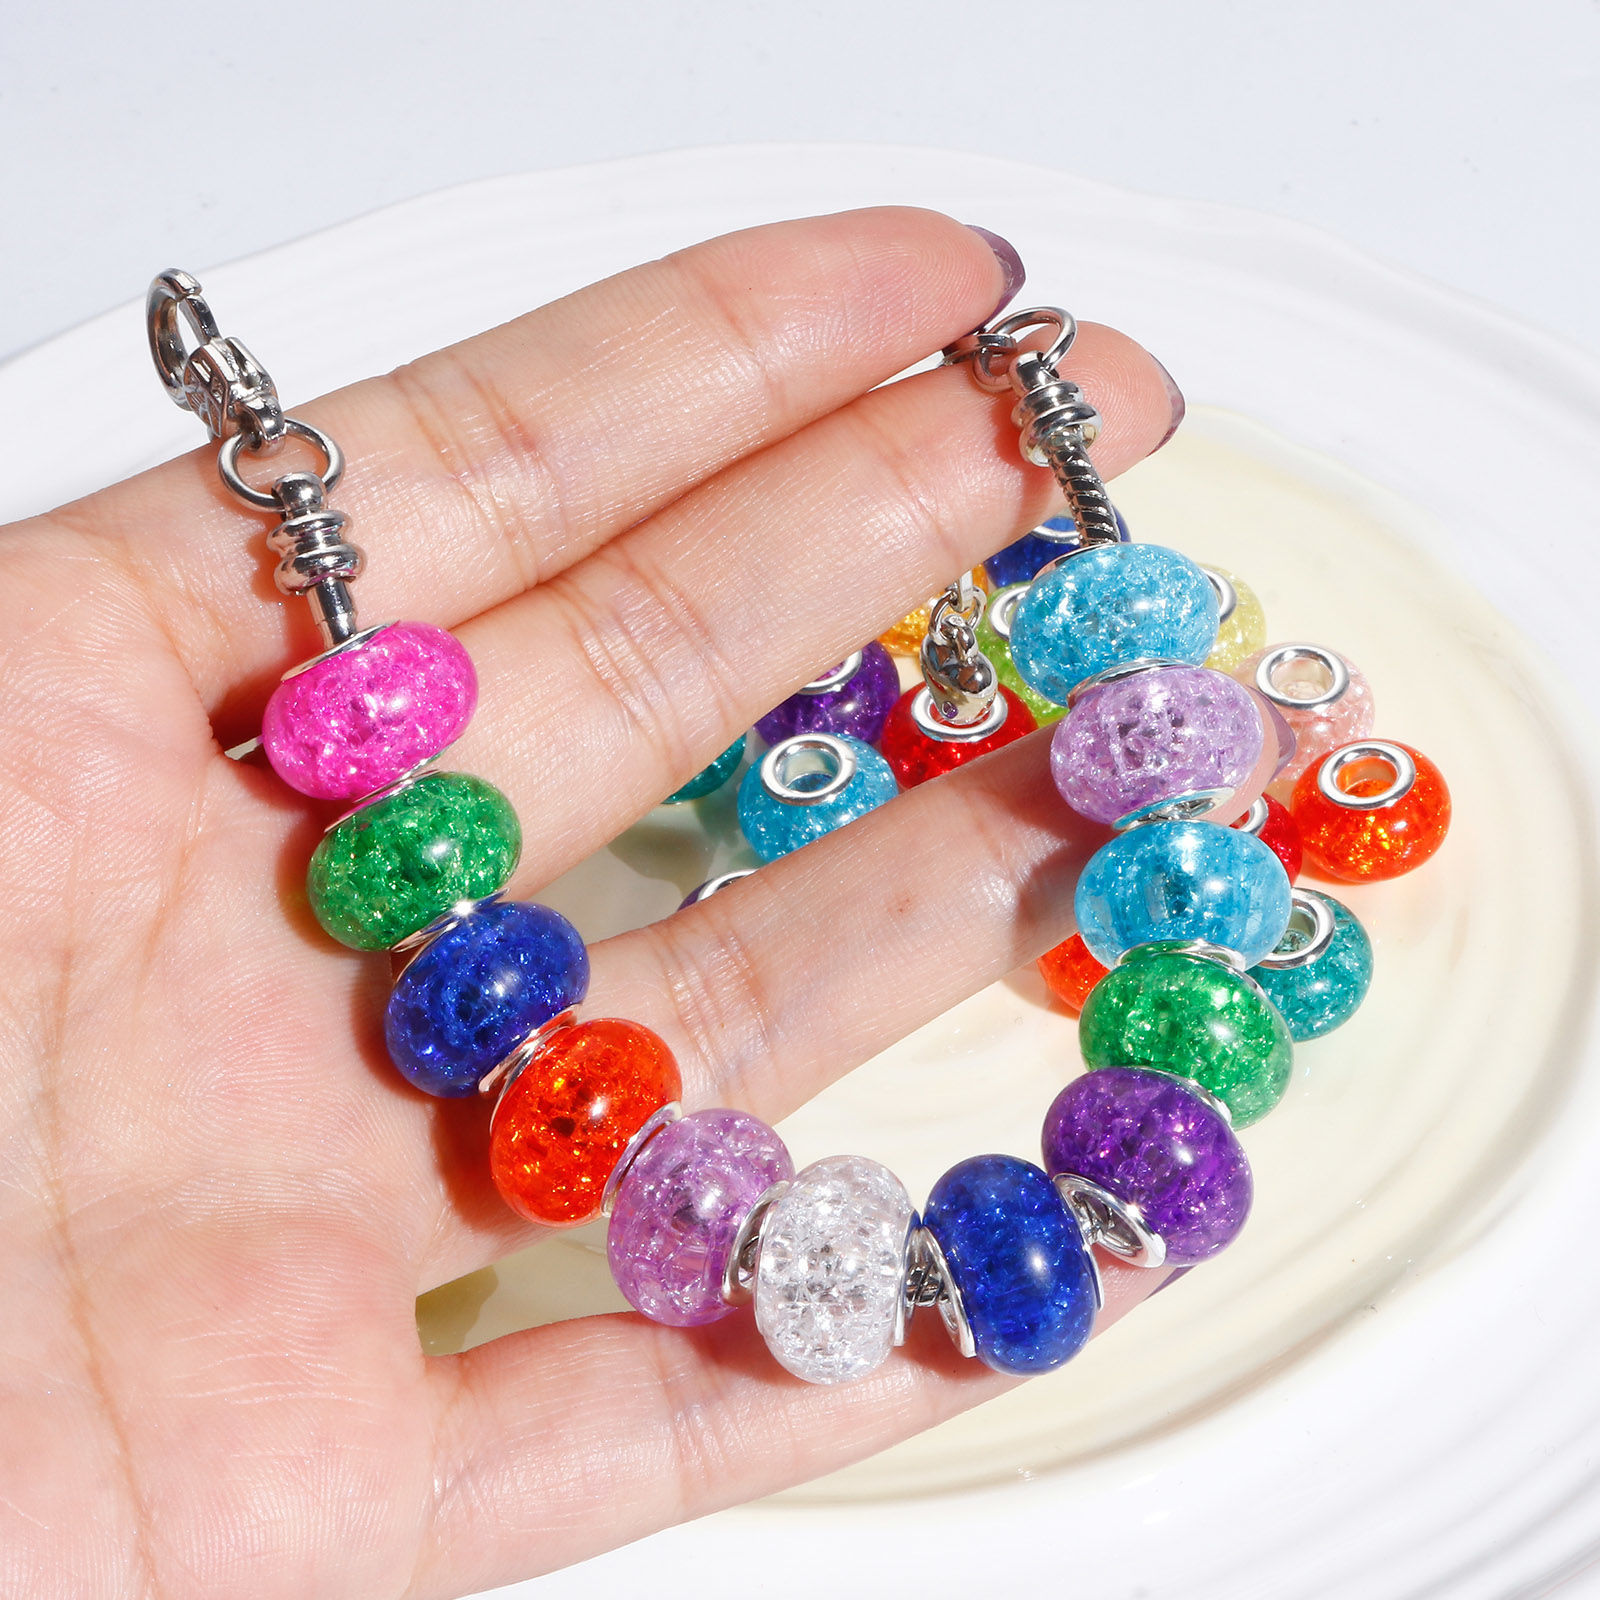 Picture of Resin European Style Large Hole Charm Beads Multicolor Round Crackle 14mm Dia.